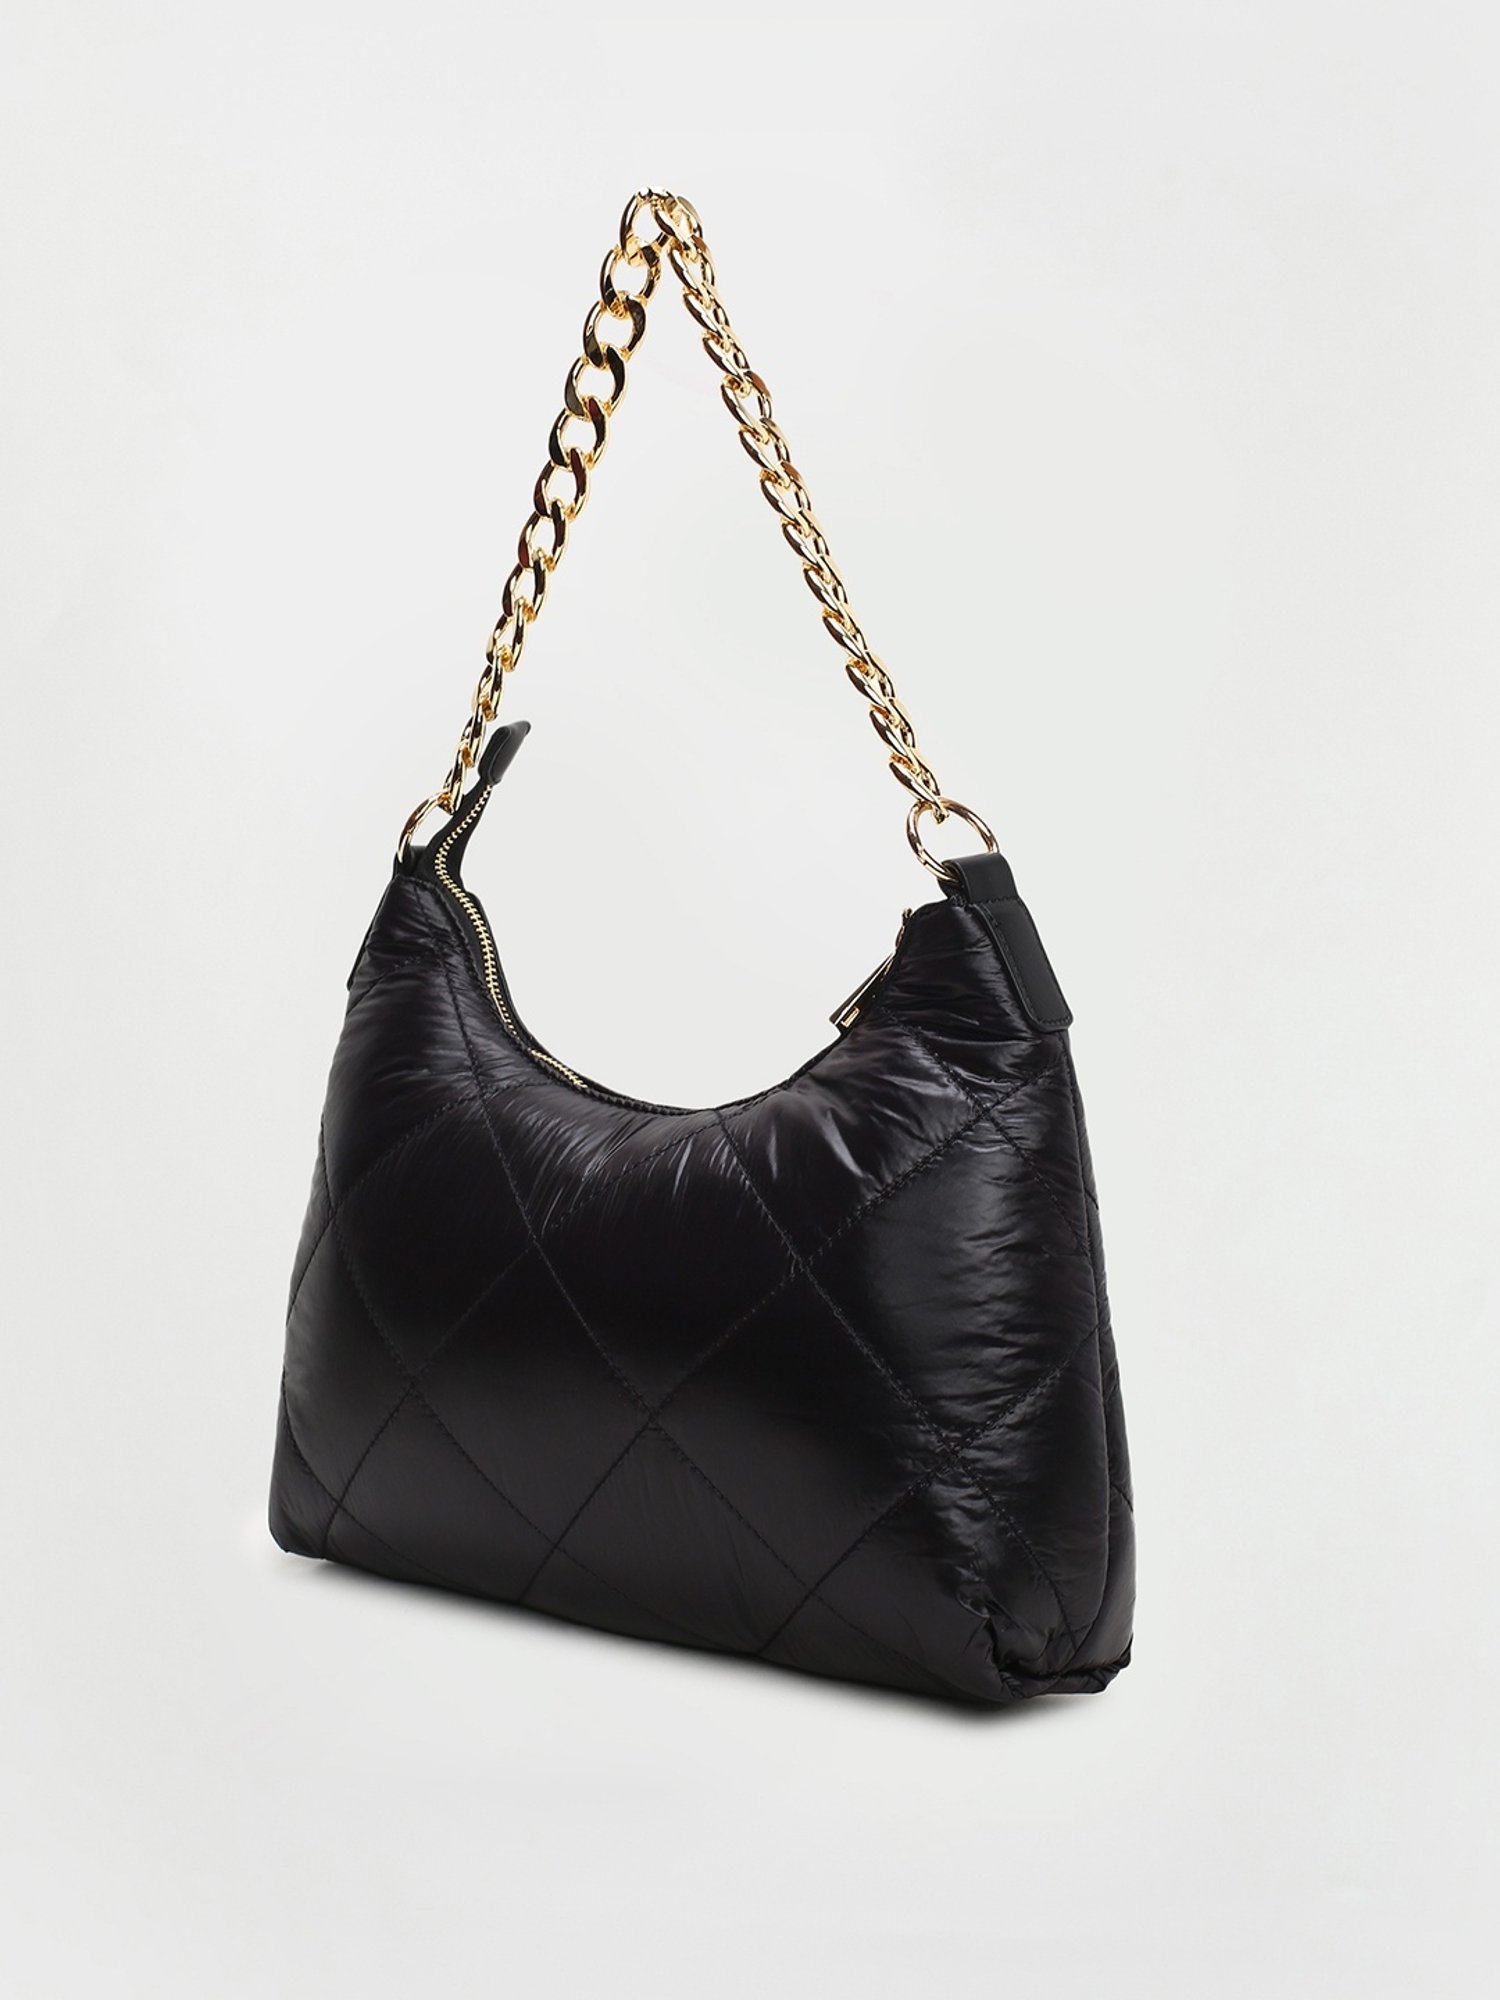 CHANEL Lambskin Quilted Small Hobo Bag Black | FASHIONPHILE